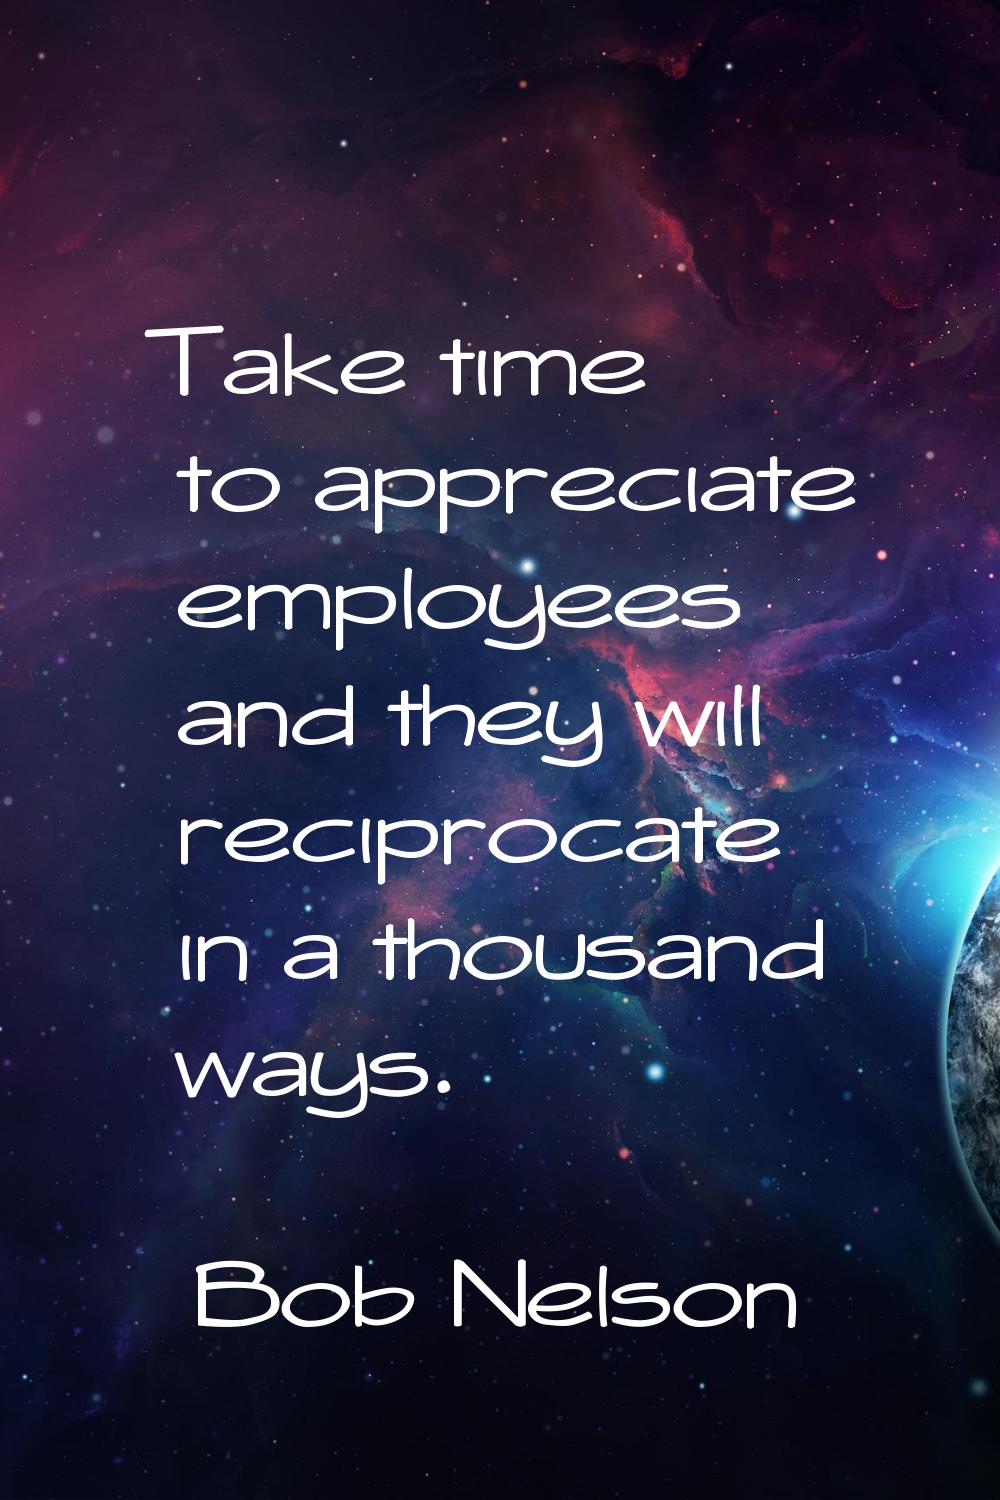 Take time to appreciate employees and they will reciprocate in a thousand ways.